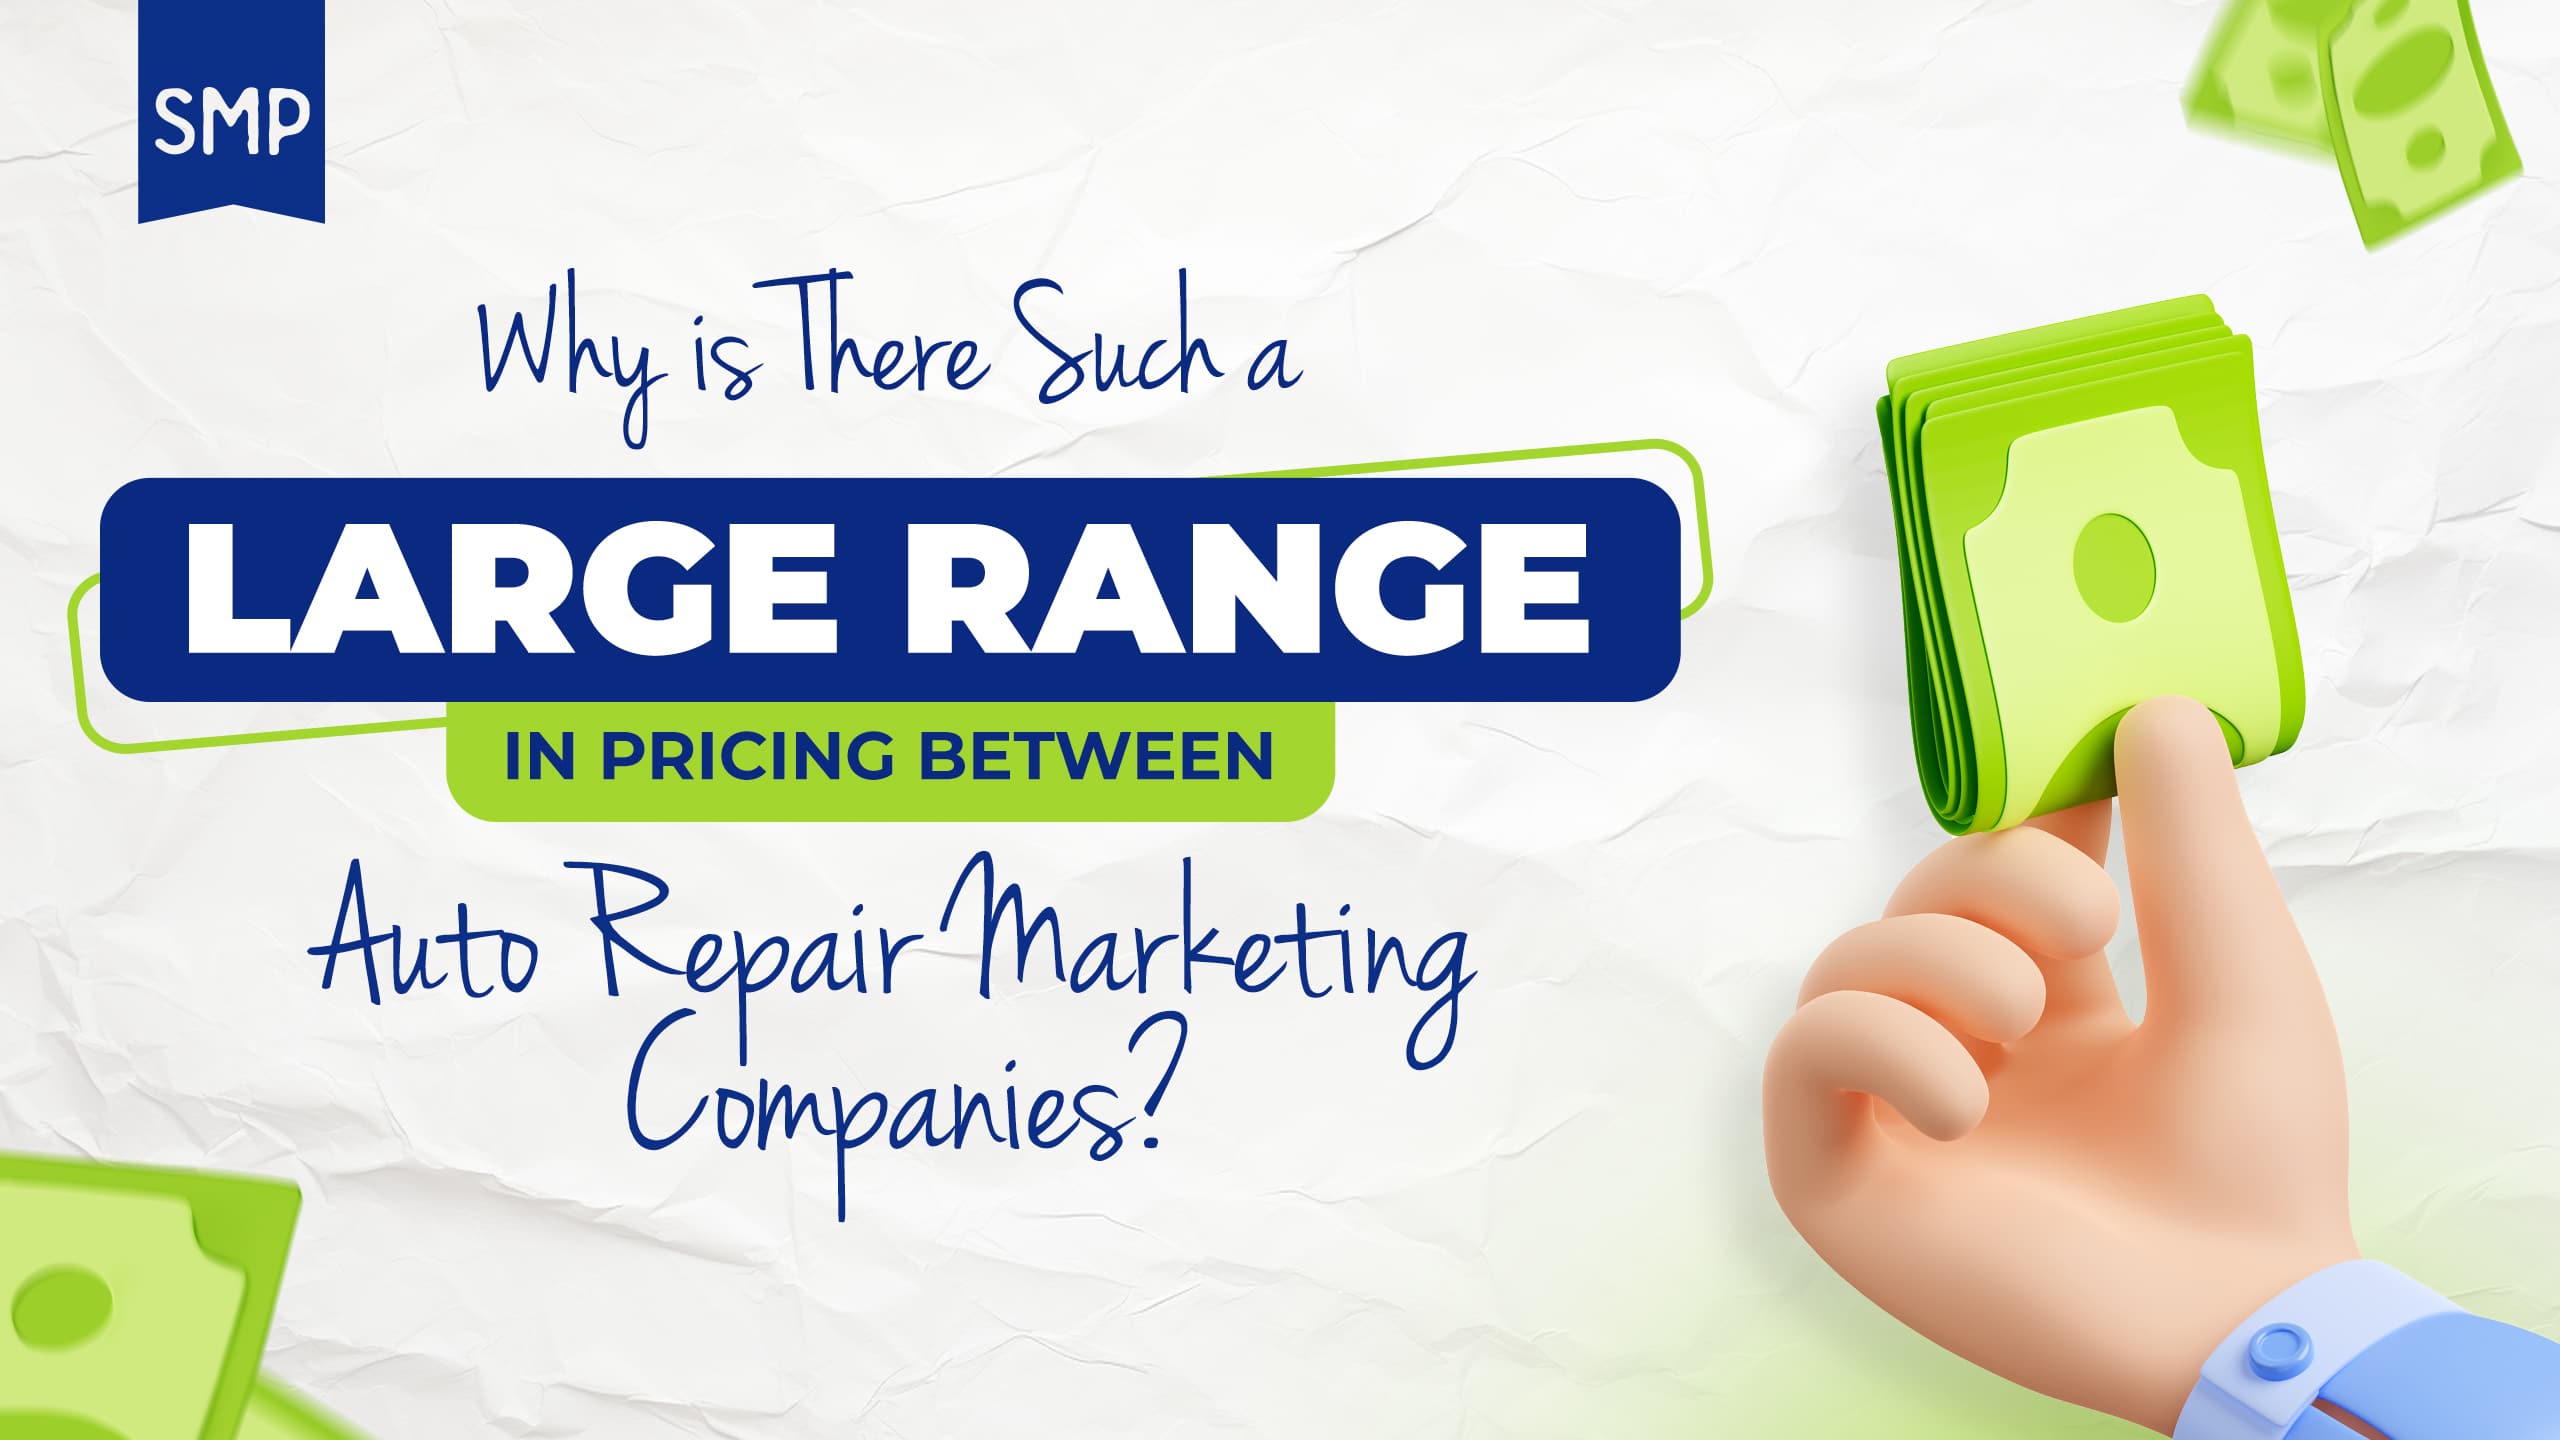 Graphic for an blog on "Why Is There Such A Large Range In Pricing Between Auto Repair Marketing Companies?". On the right side, there is an illustration of a hand holding a stack of green money bills.